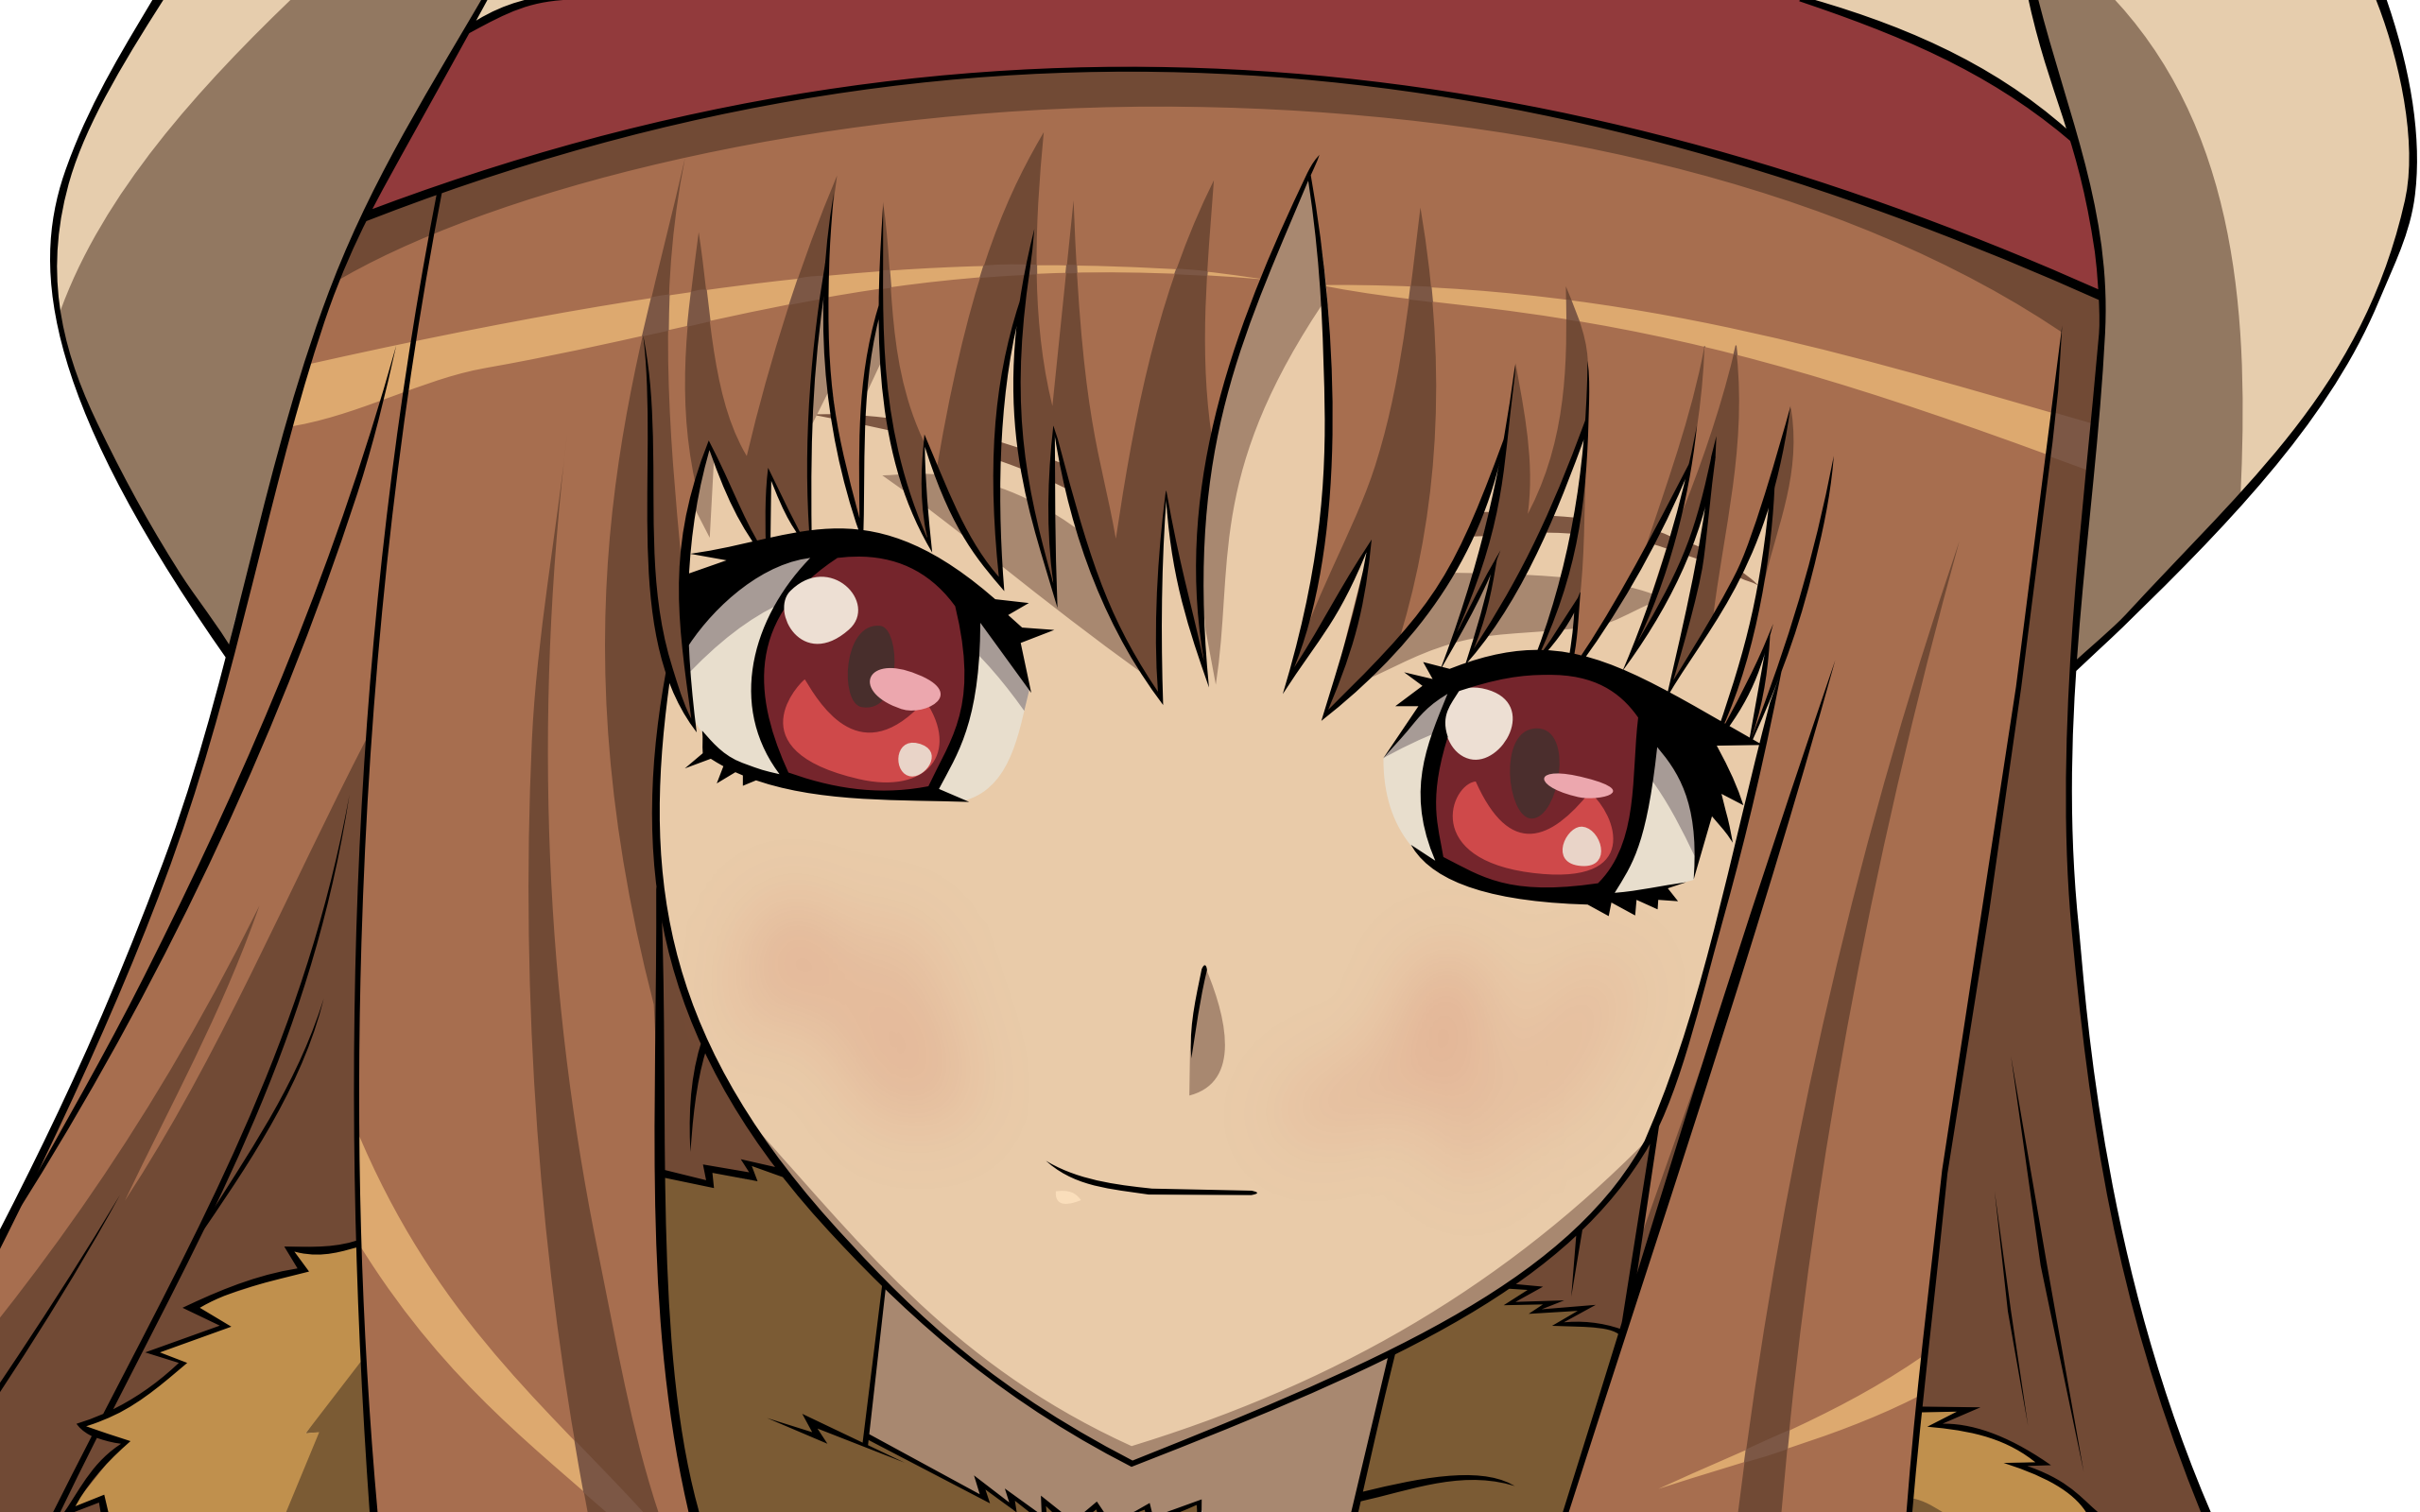 Spice and Wolf, transparent, Holo The Wise Wolf, anime vectors - desktop wallpaper